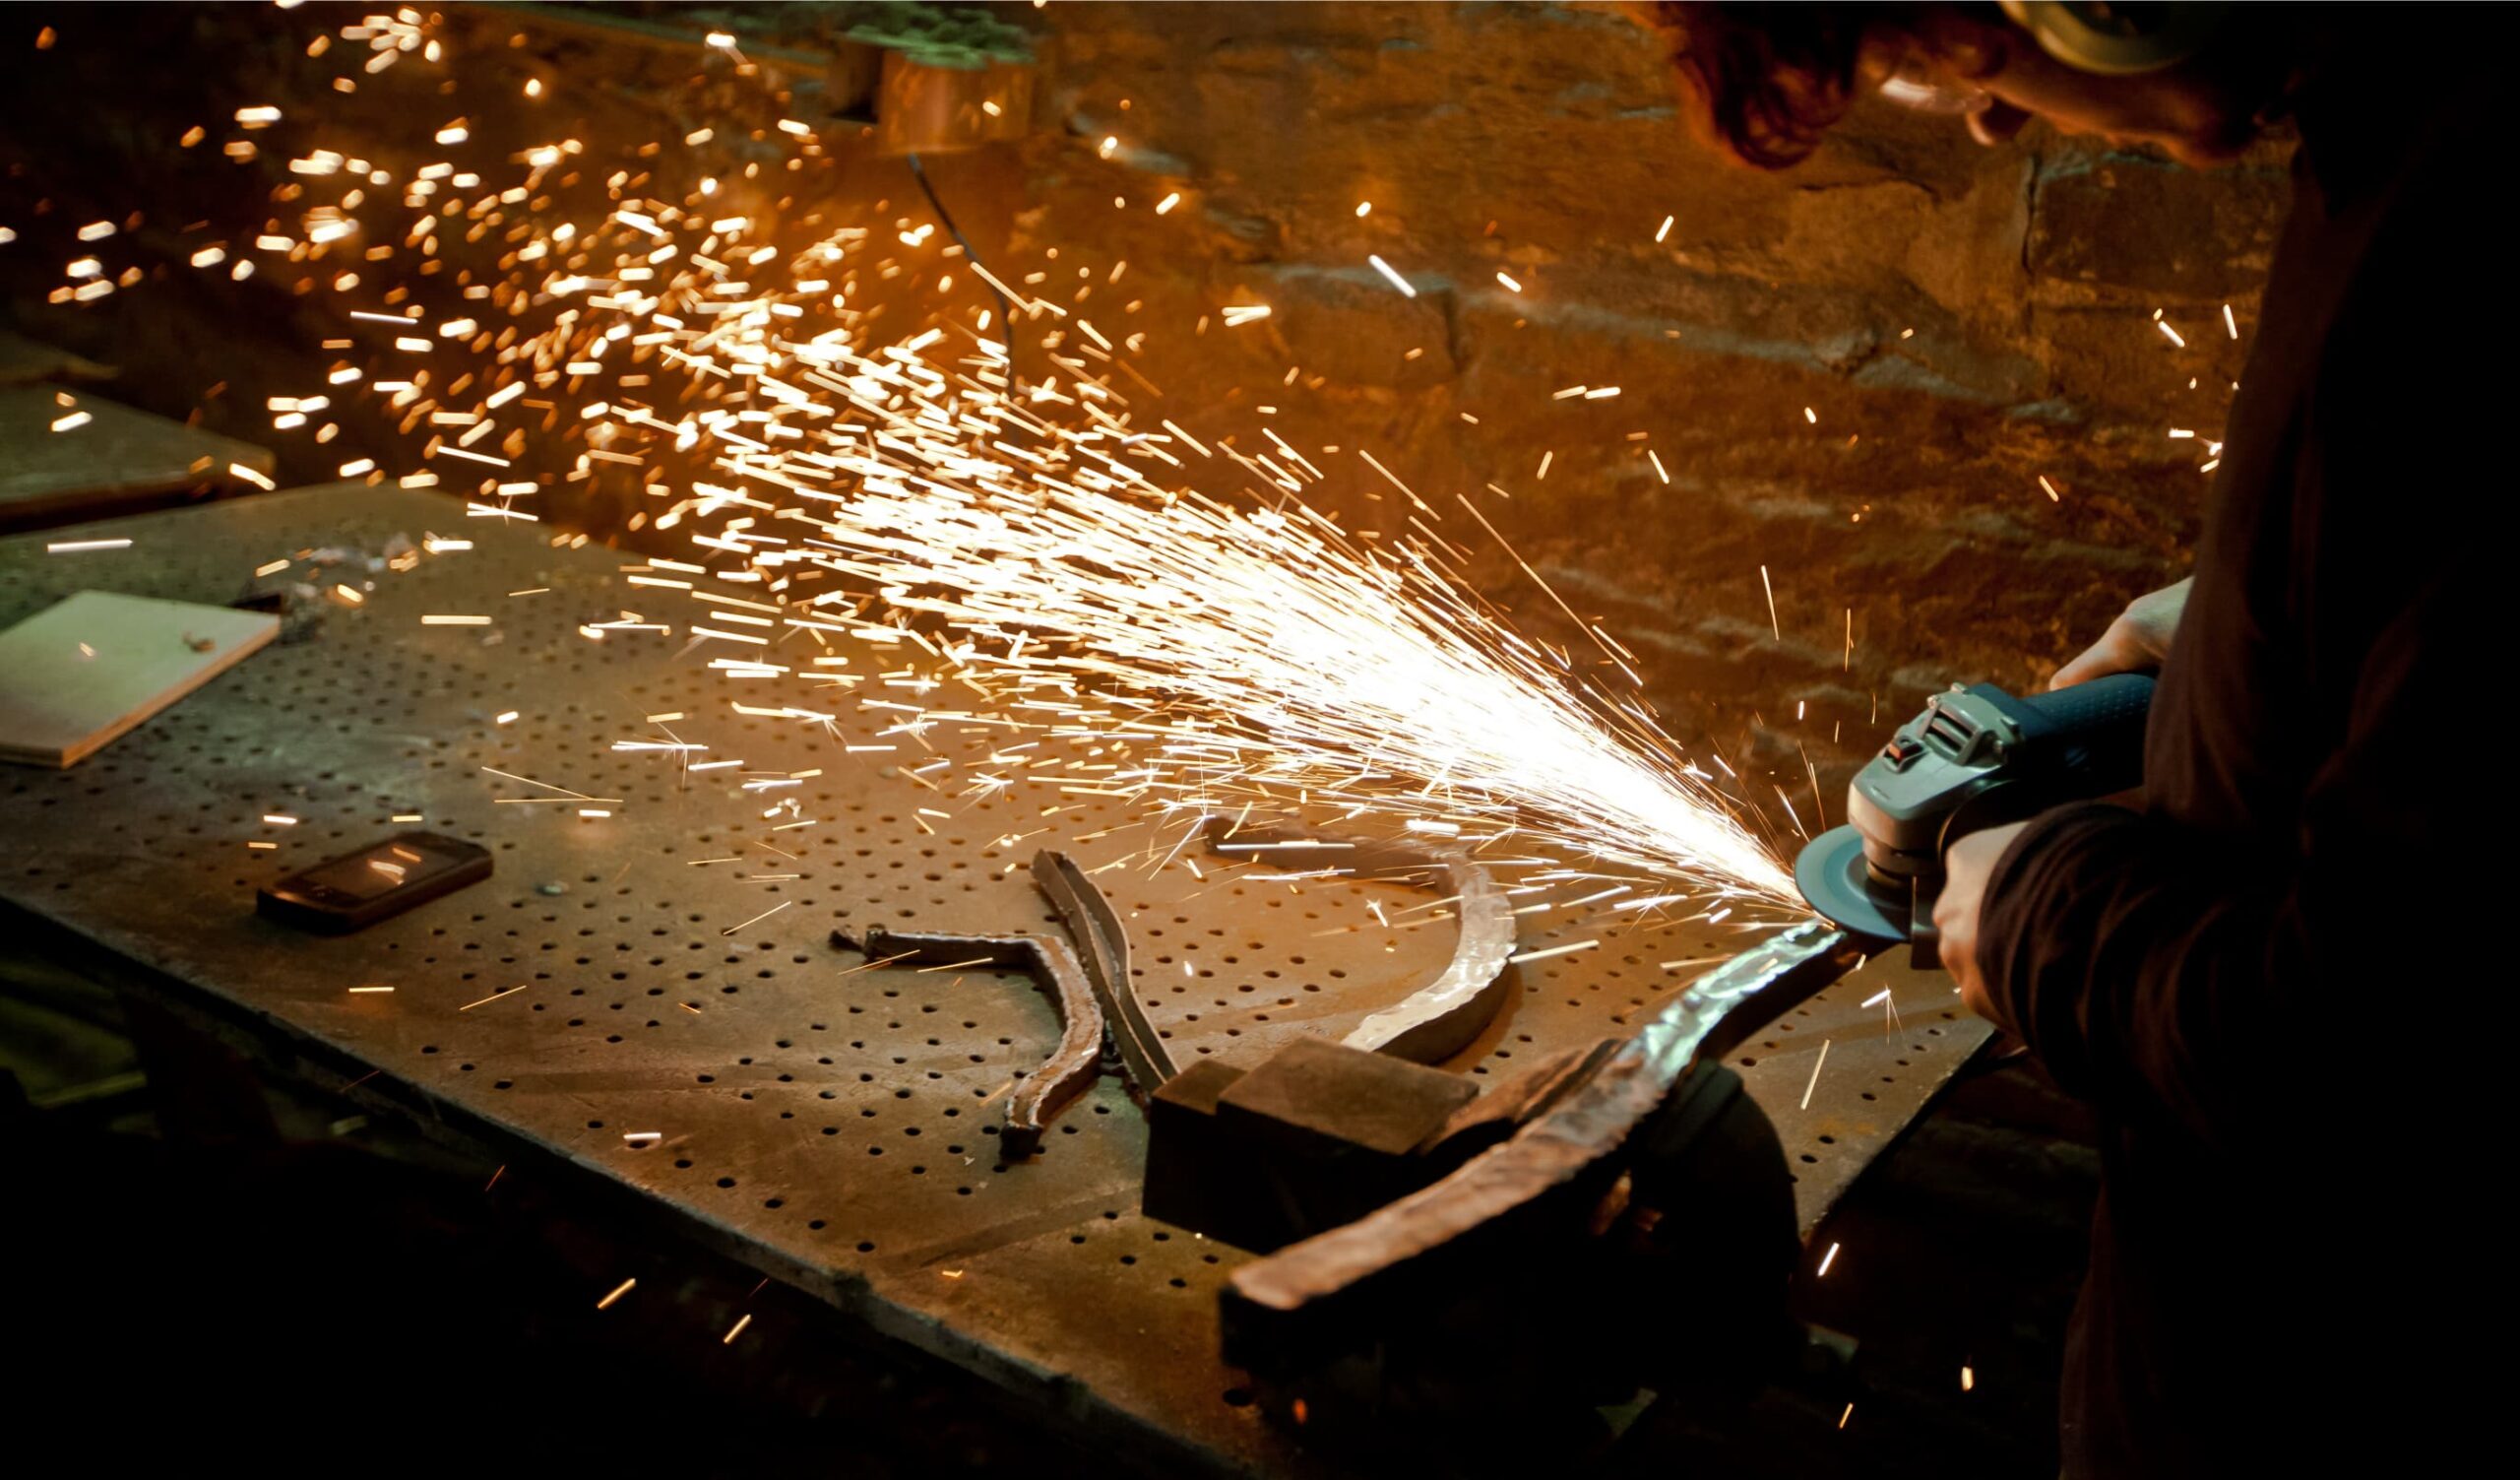 Person grinding metal at table in workshop.